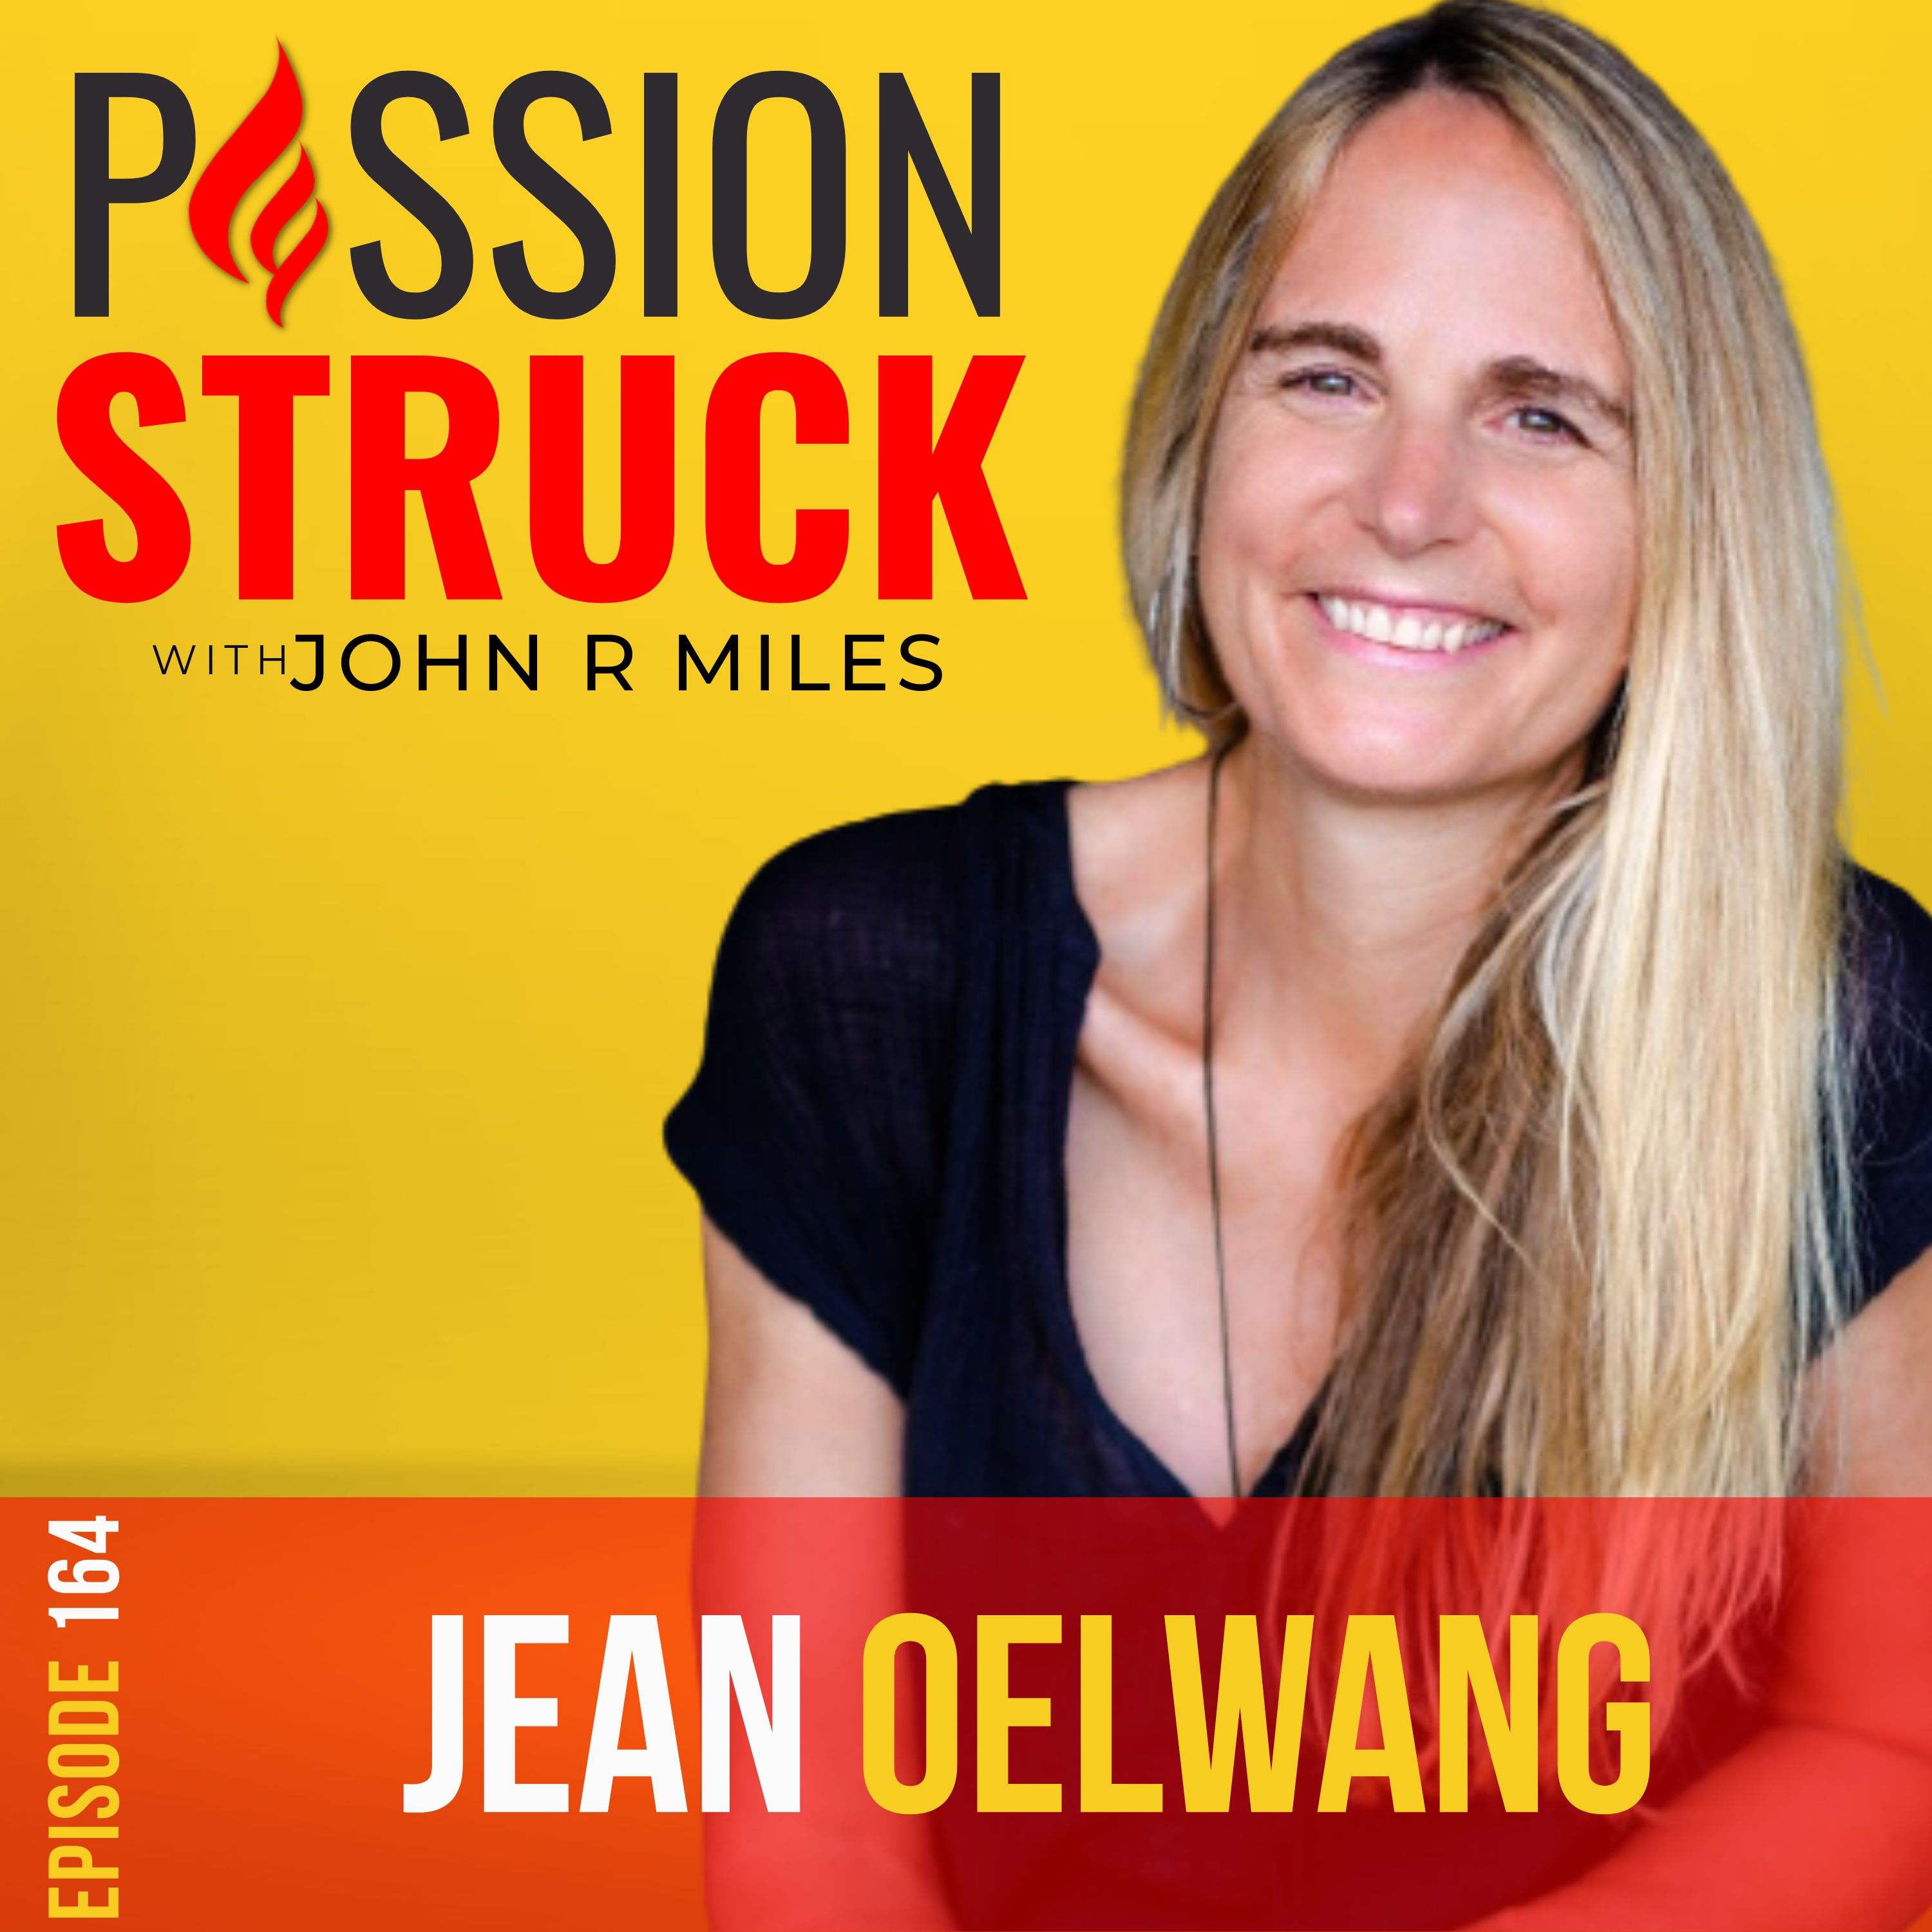 Passion Struck podcast album cover for episode 164 with Jean Oelwang on her book Partnering